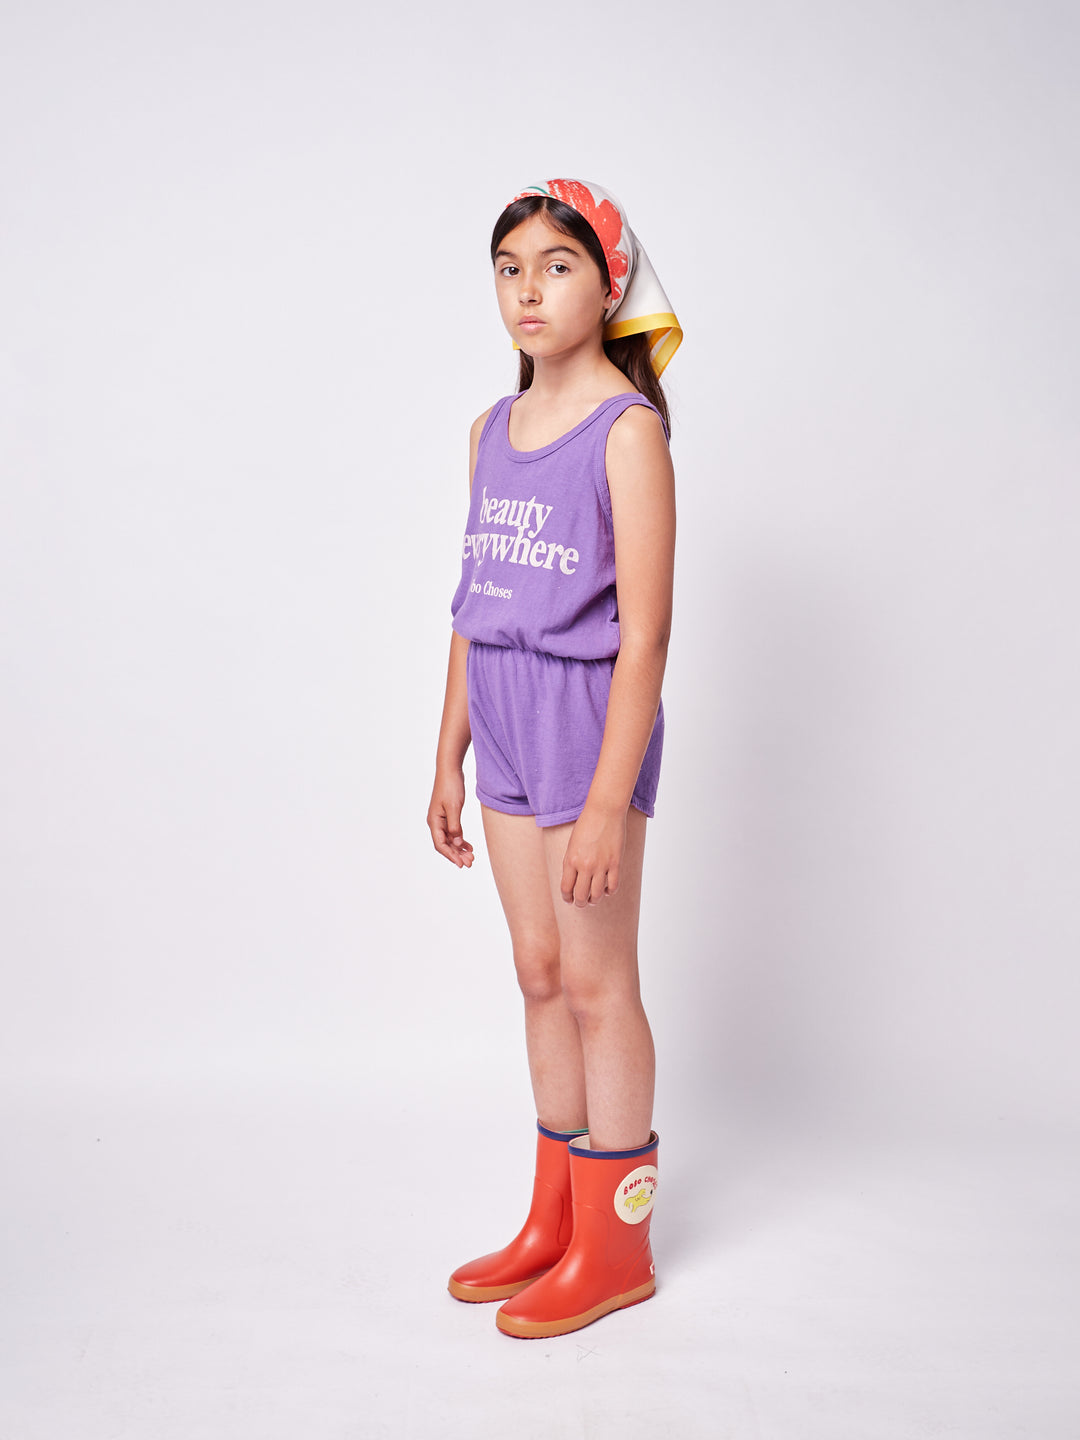 brown-haired little girl with purple bobo choses ''Beauty Everywhere'' playsuit, colorful headscarf and red rainboots